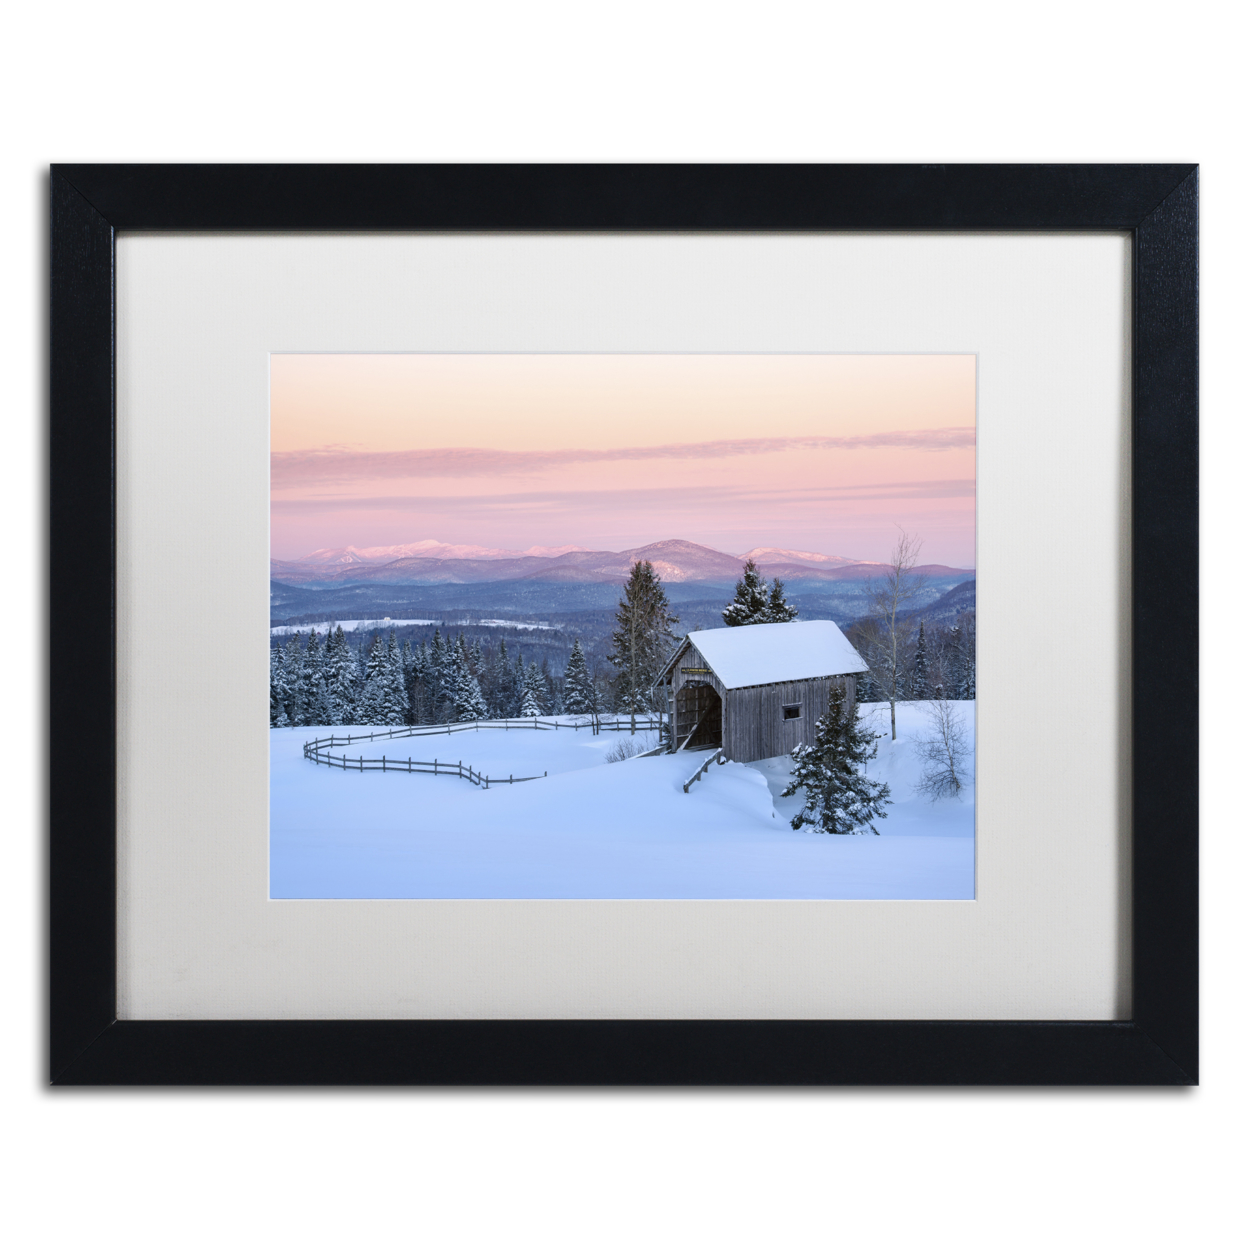 Michael Blanchette Photography 'Bridge On A Hill' Black Wooden Framed Art 18 X 22 Inches